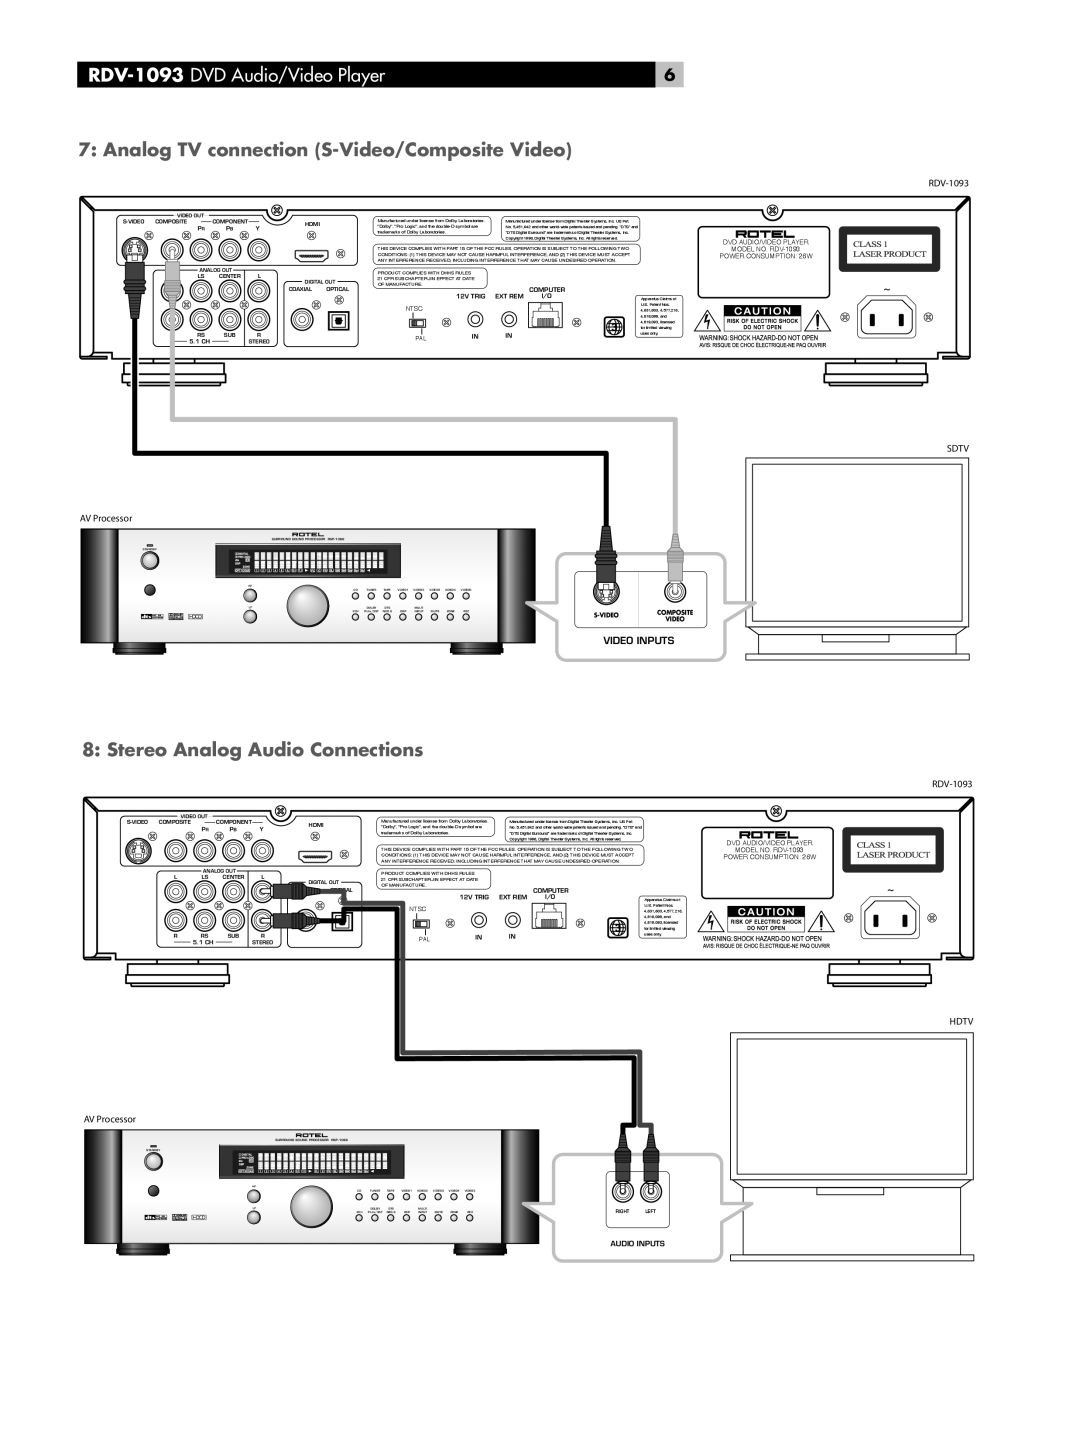 Rotel RDV-1093 owner manual Analog TV connection S-Video/Composite Video, Stereo Analog Audio Connections, Ntsc 